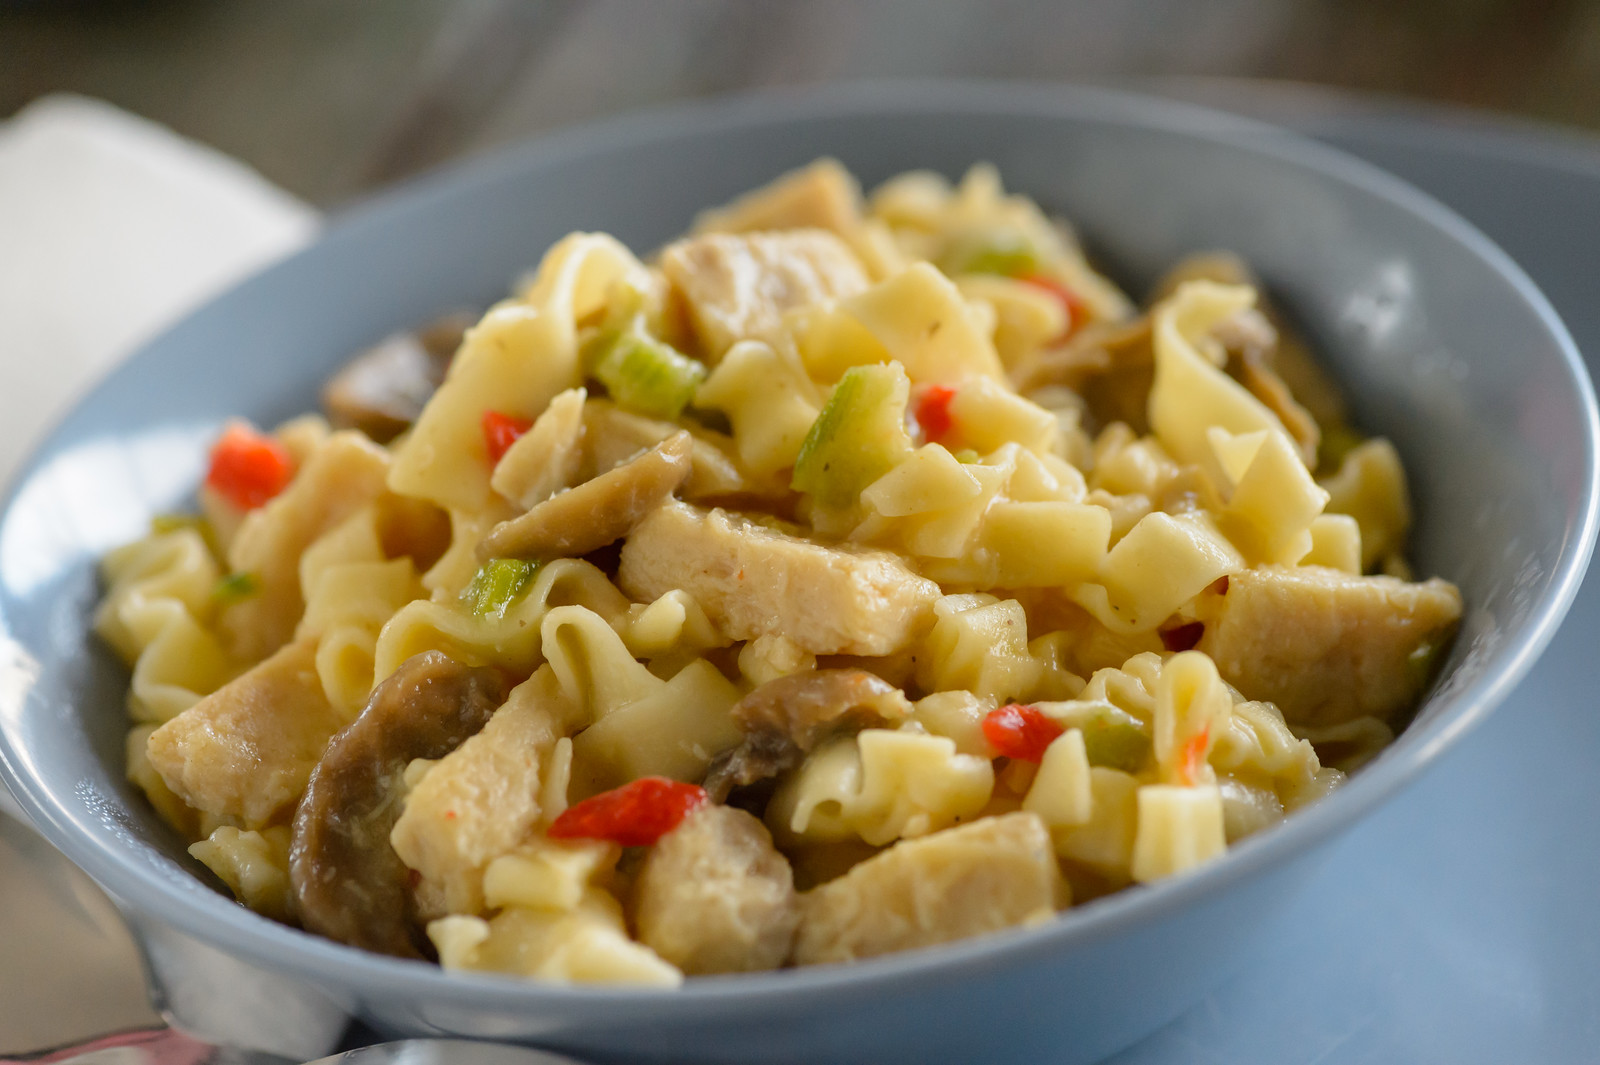 Mountain House Freeze-Dried Chicken And Dumplings With Vegetables - 2 Servings - image 3 of 5